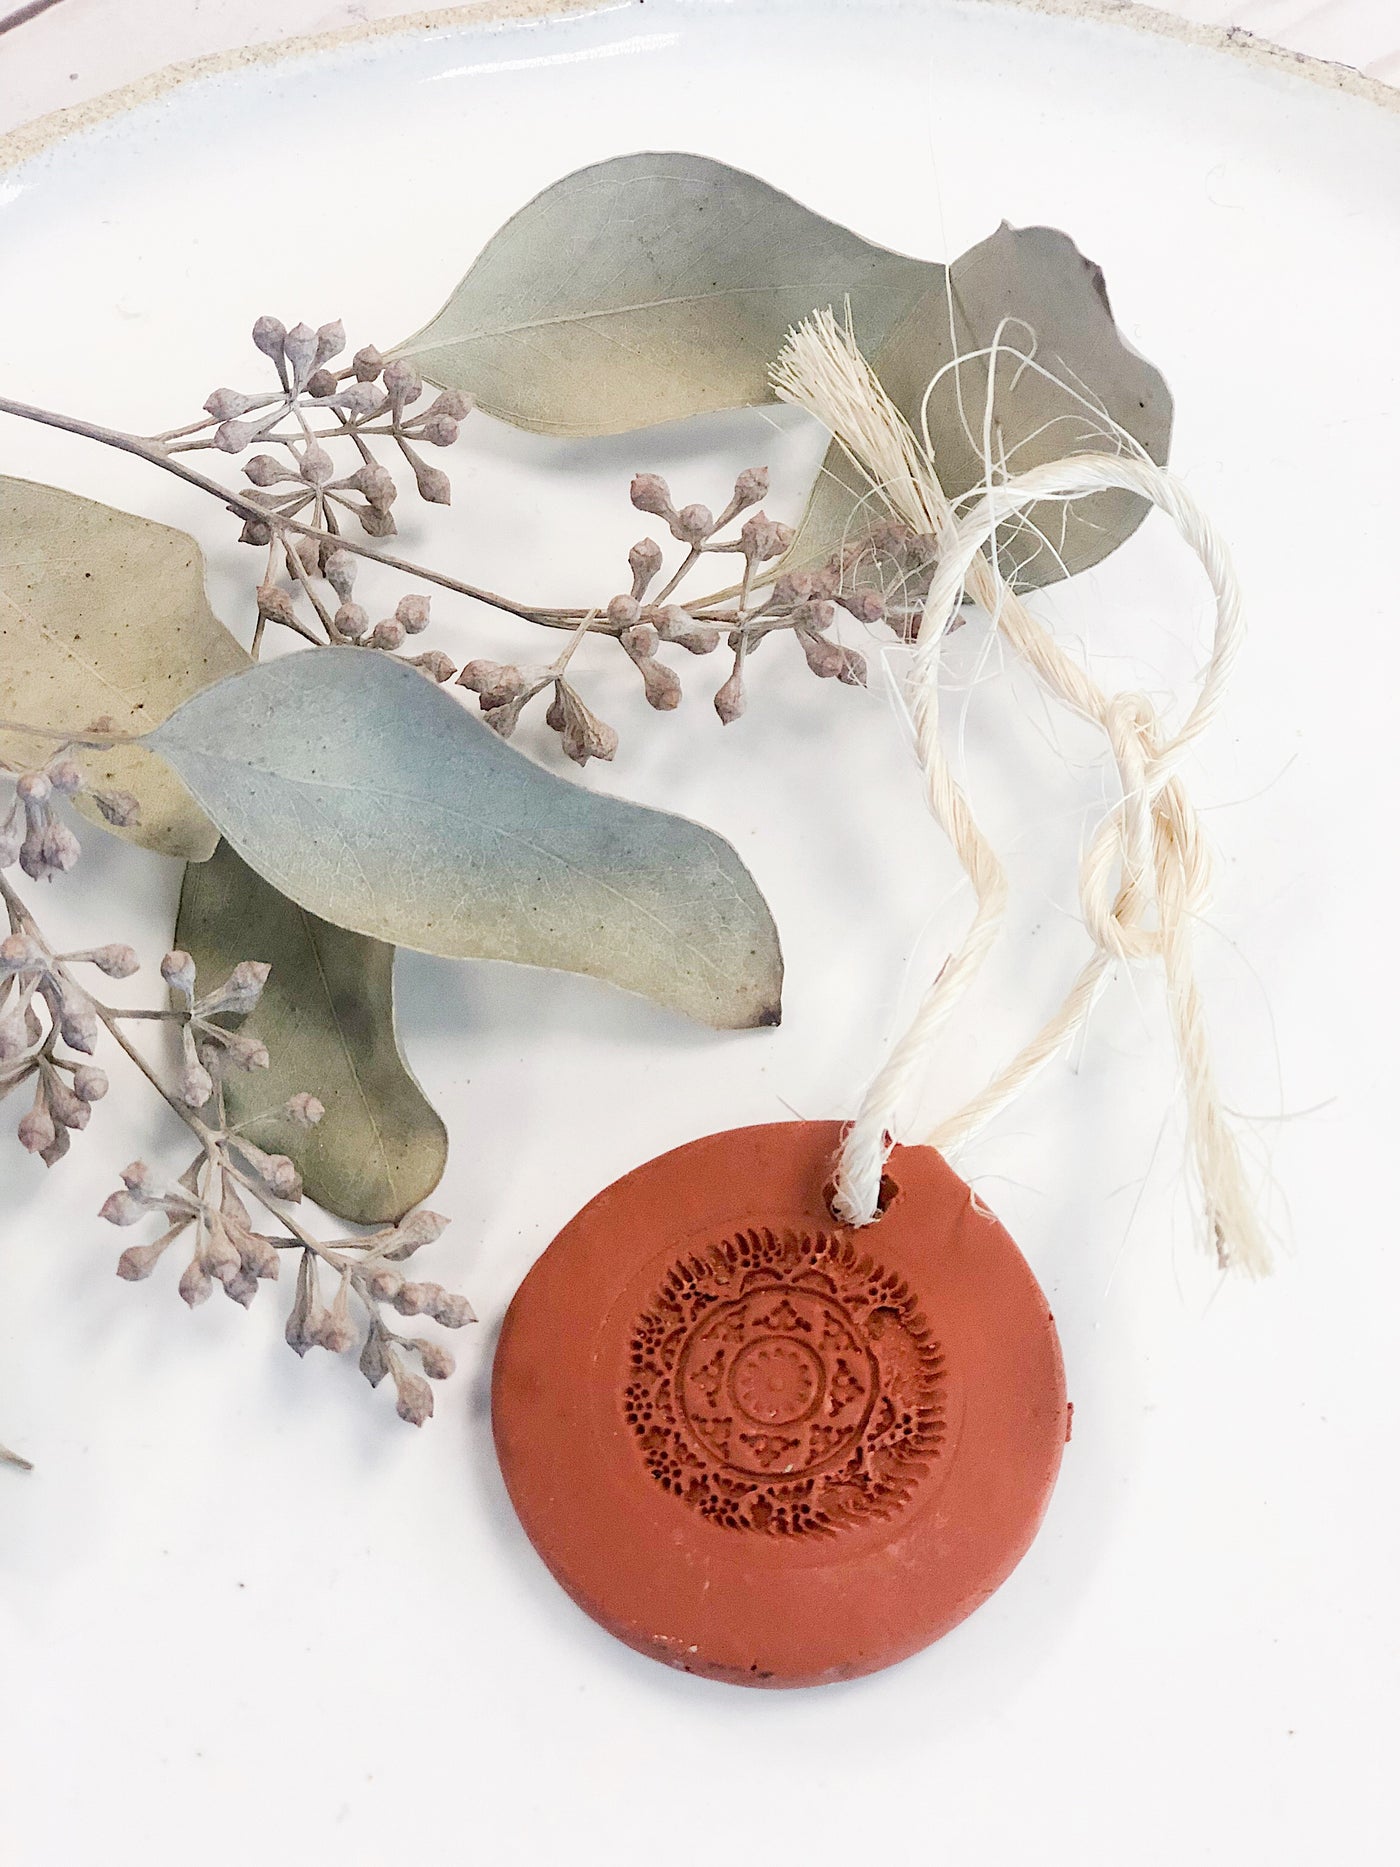 Organic Vegan Cruelty-Free Terra Cotta Essential Oil Diffuser/ Air Freshener - Roses & Chains | Fashionable Clothing, Shoes, Accessories, & More